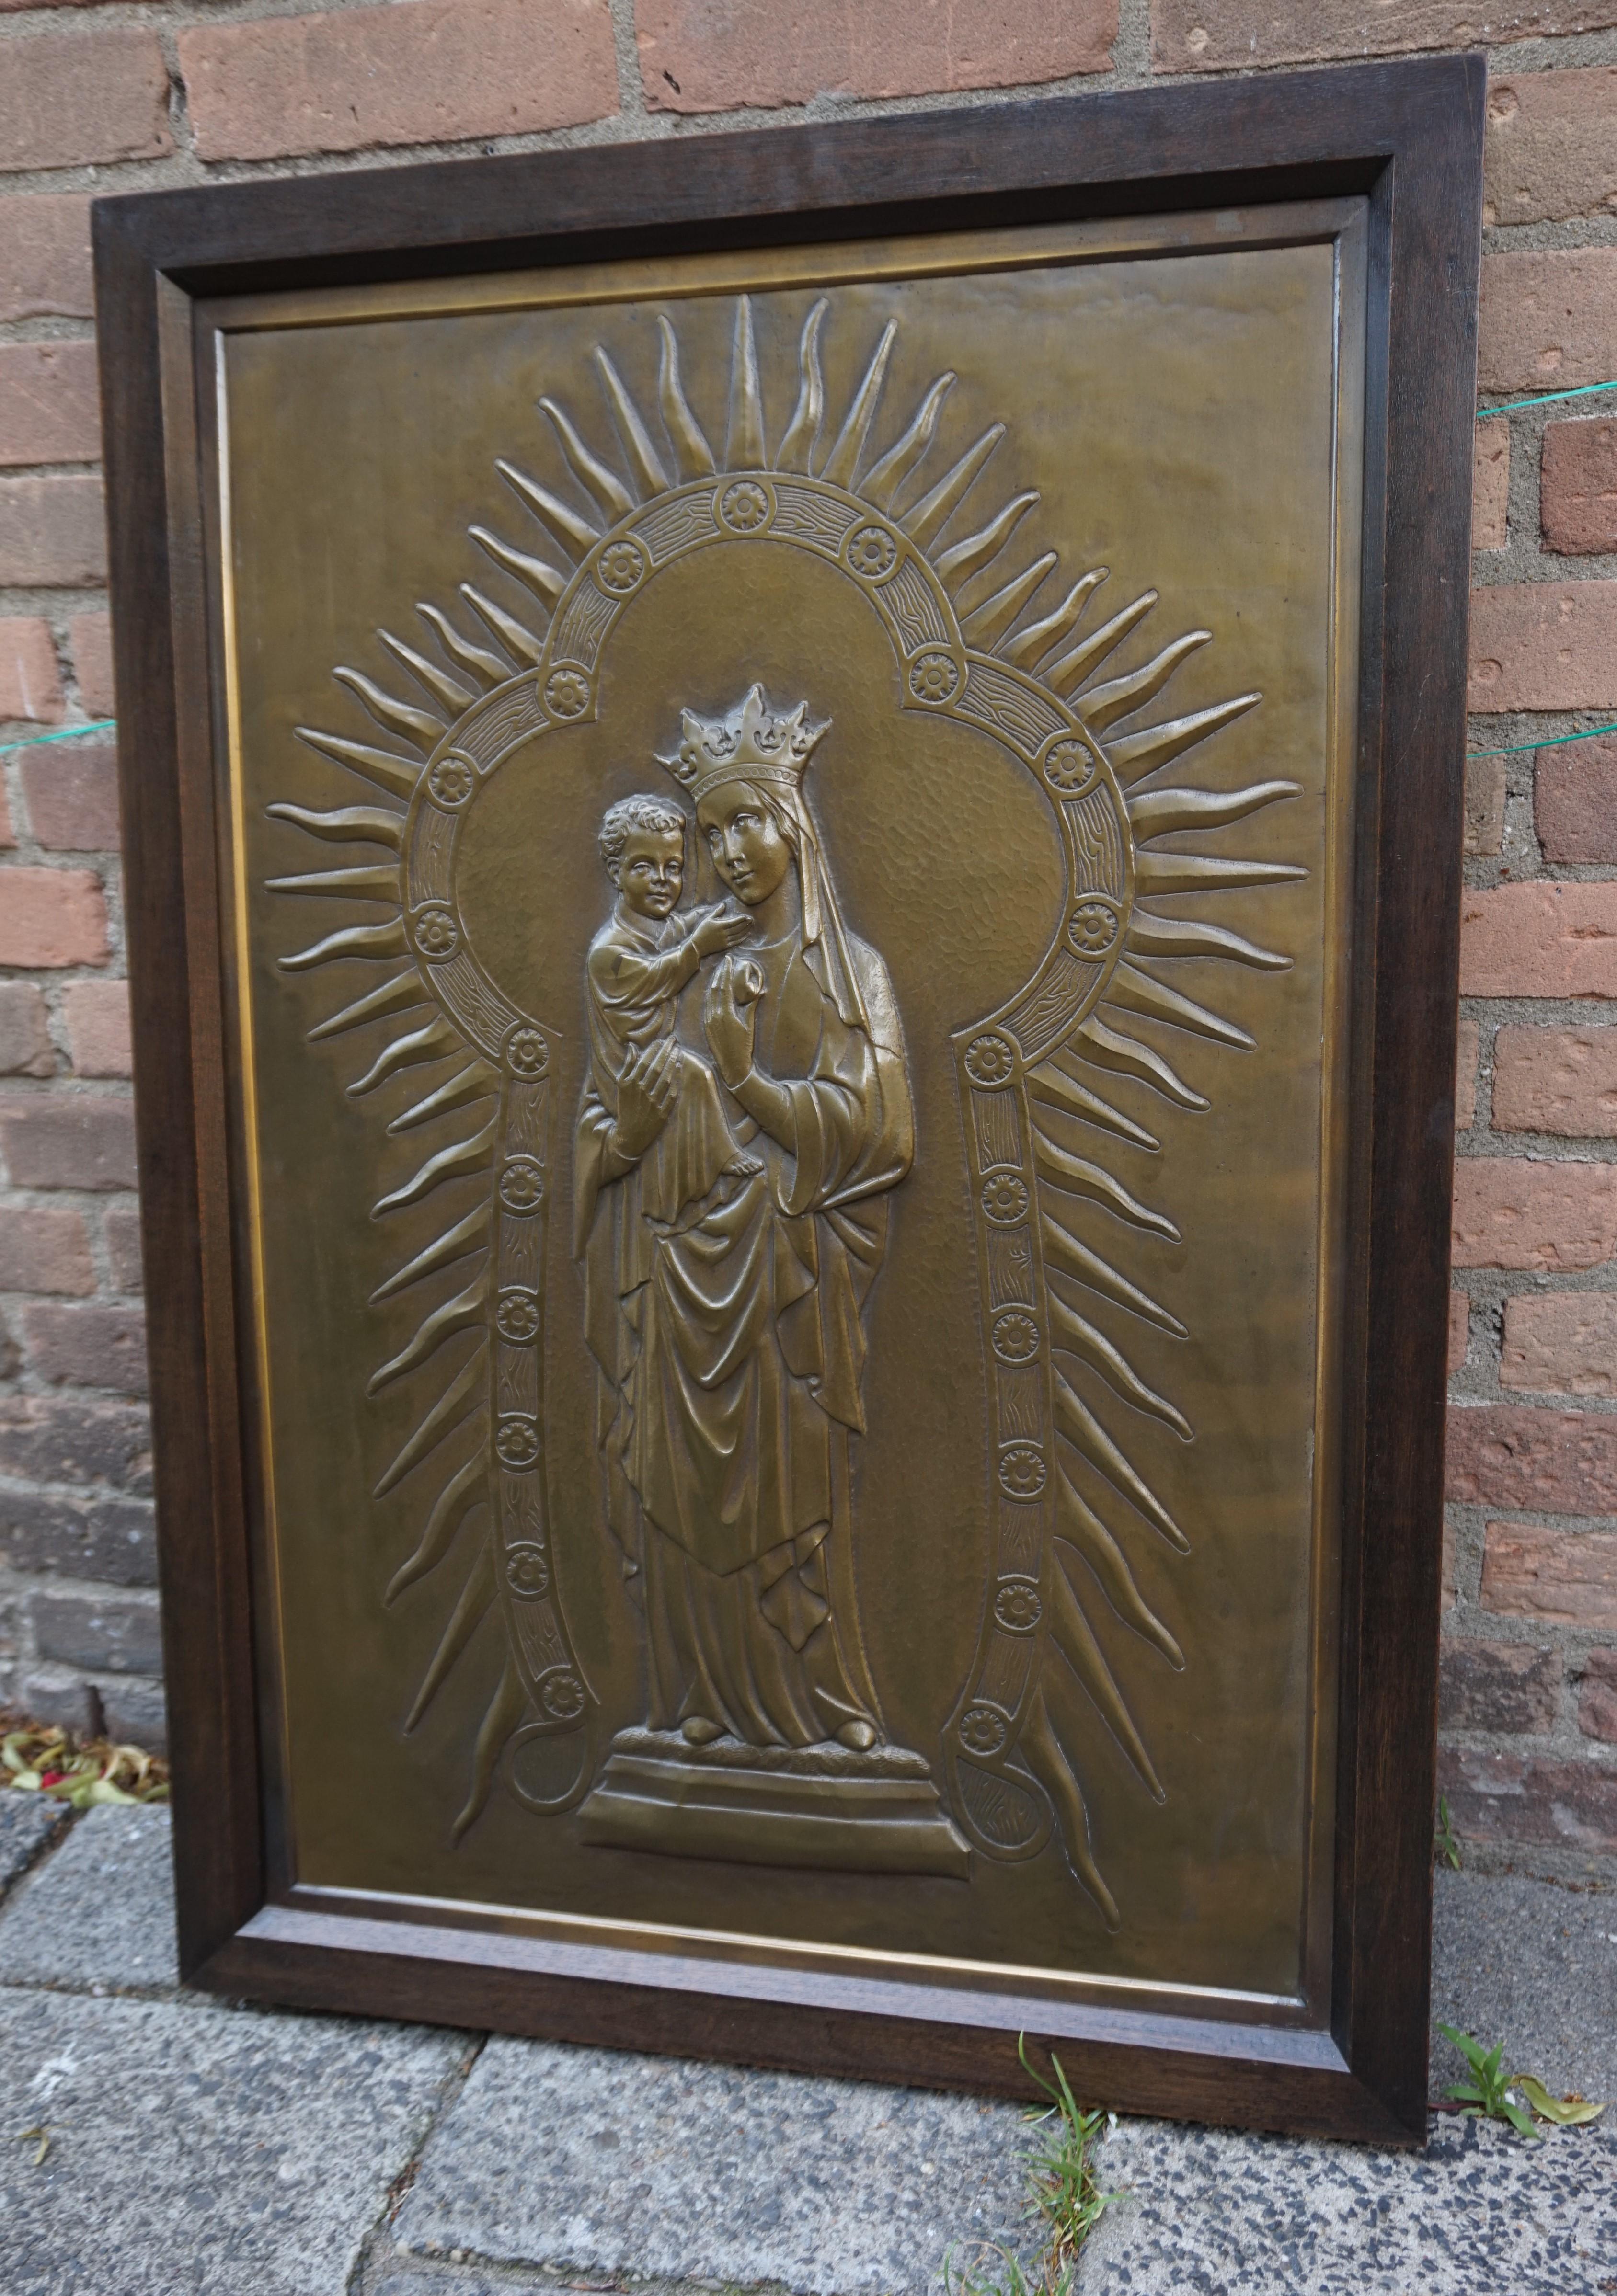 Antique Mary and Child Jesus Gothic Revival Brass Church Wall Plaque / Sculpture 12